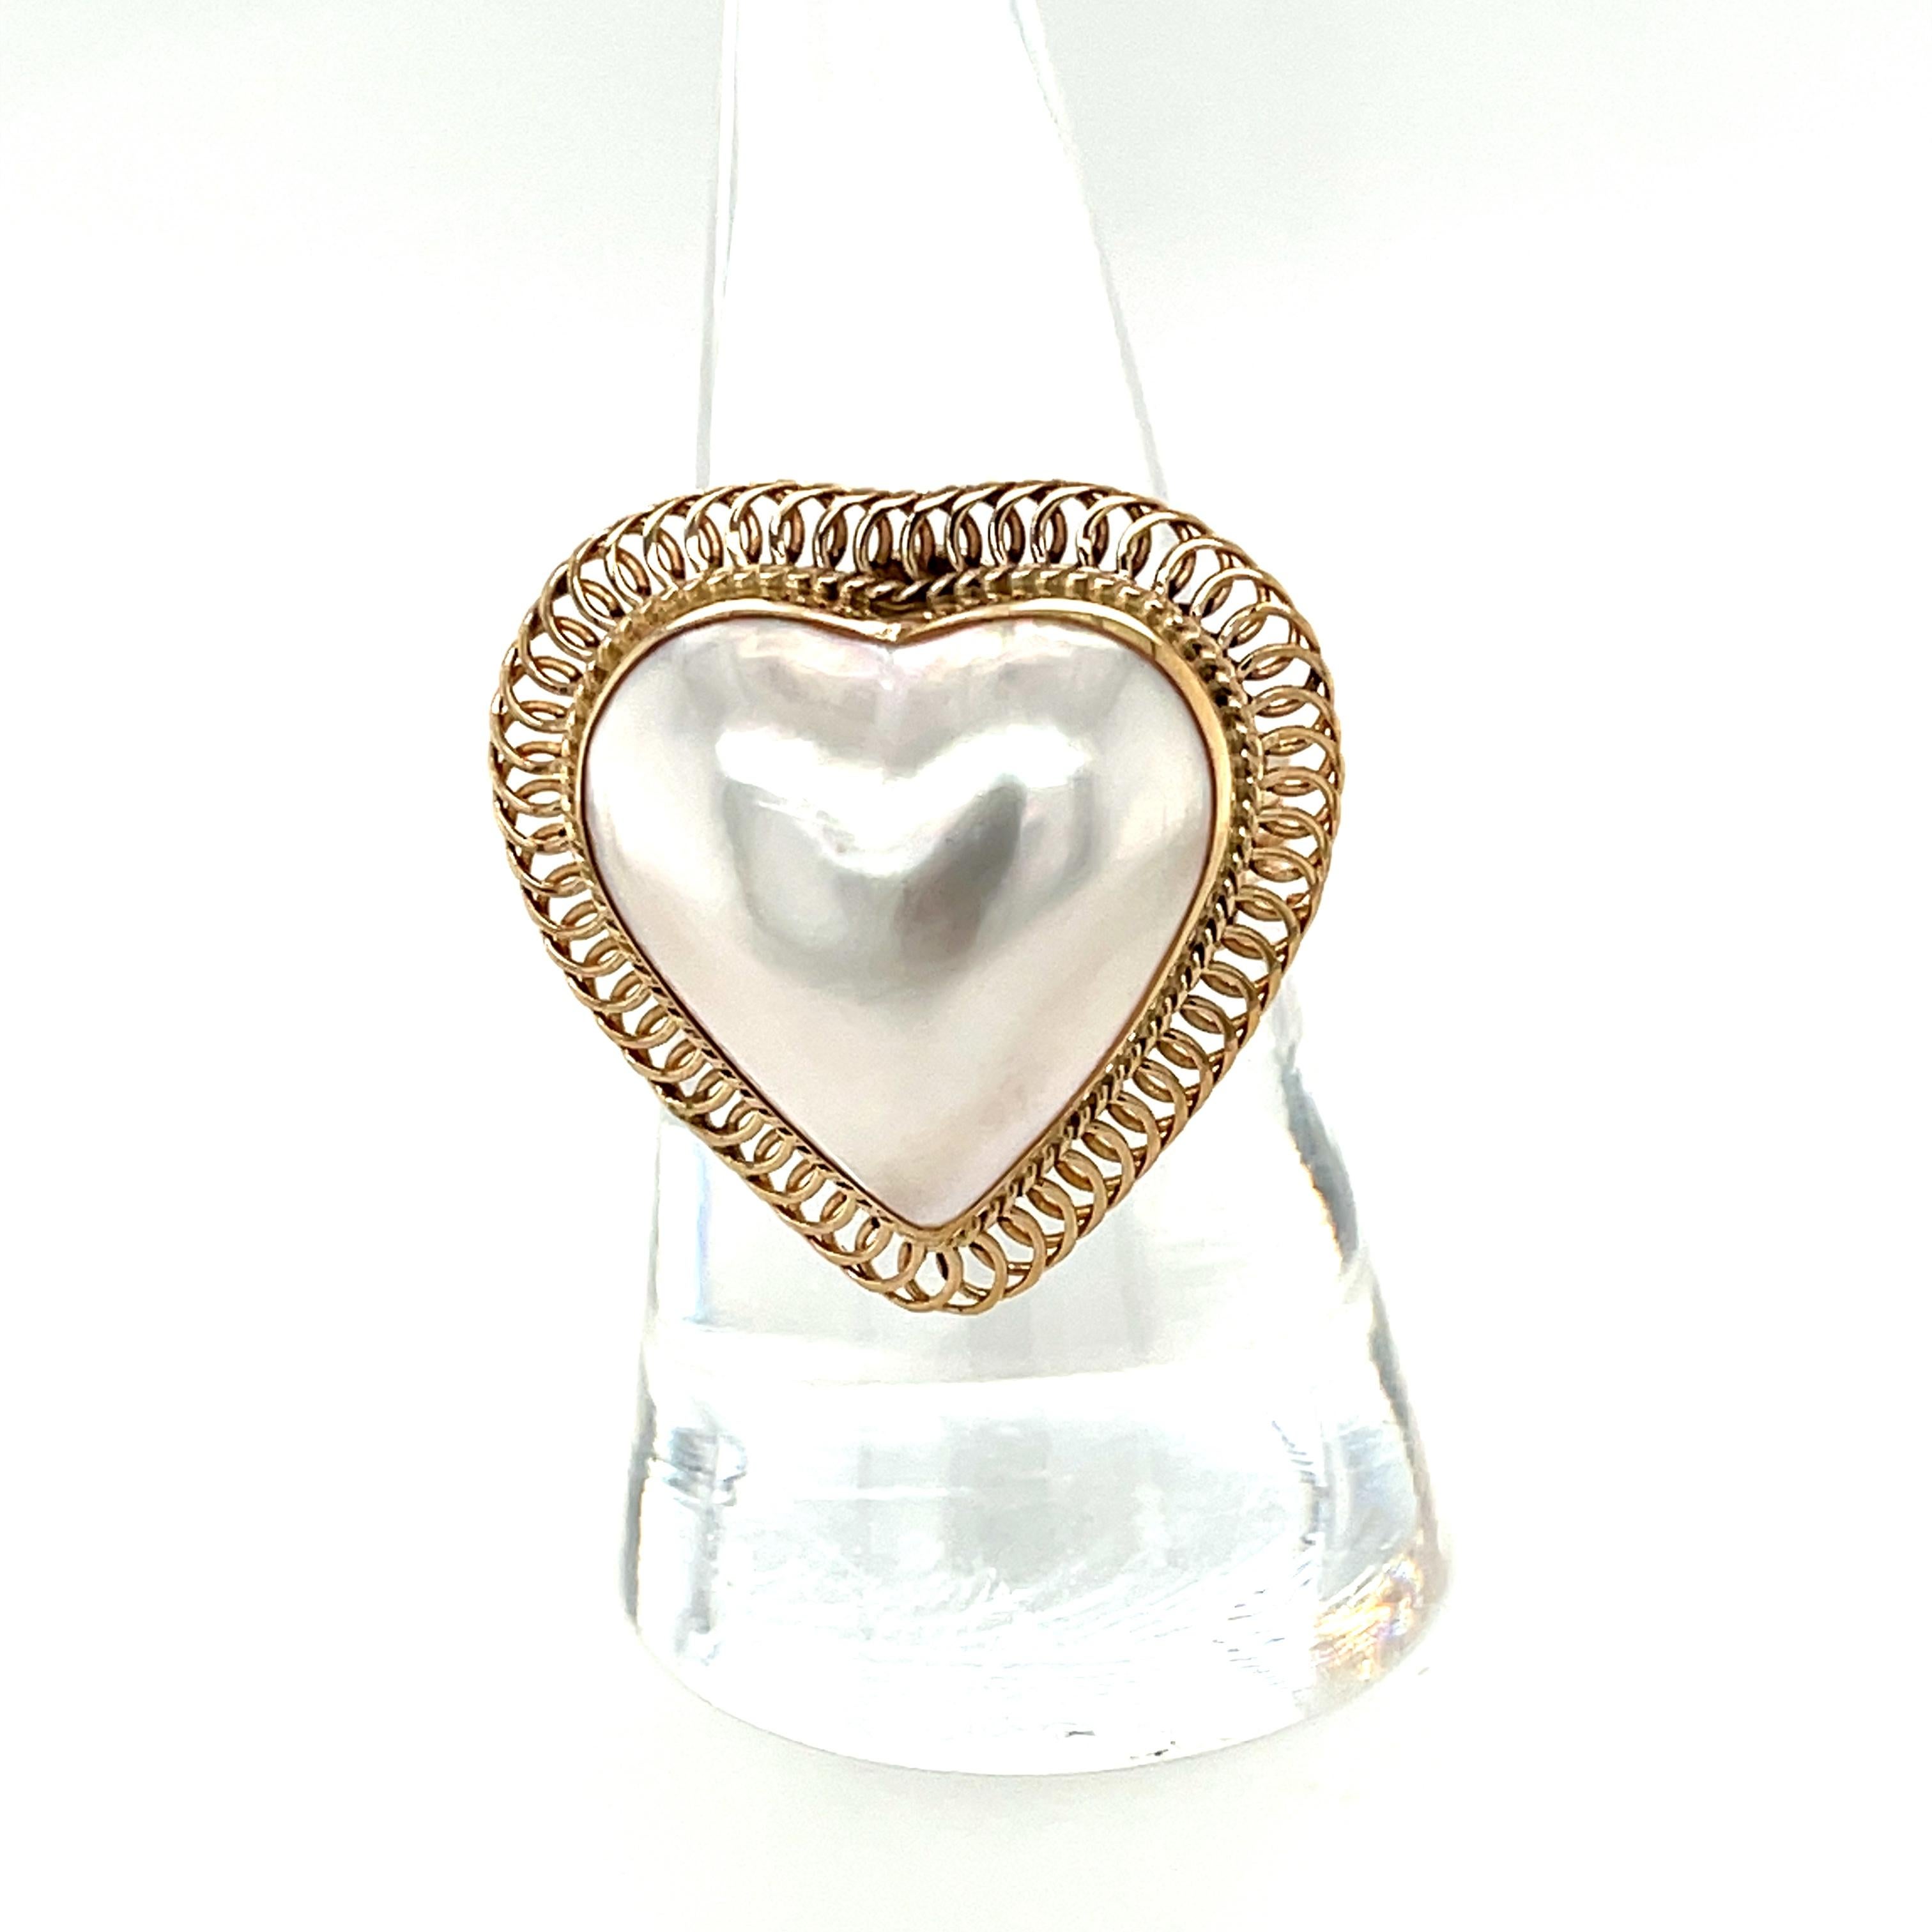 This exquisite handmade ring features a large, heart-shaped Mabe pearl that has been framed with an intricate spiral design crafted from delicate 14k yellow gold wire. The 18mm pearl has beautiful luster and pearlescence and it certainly has a